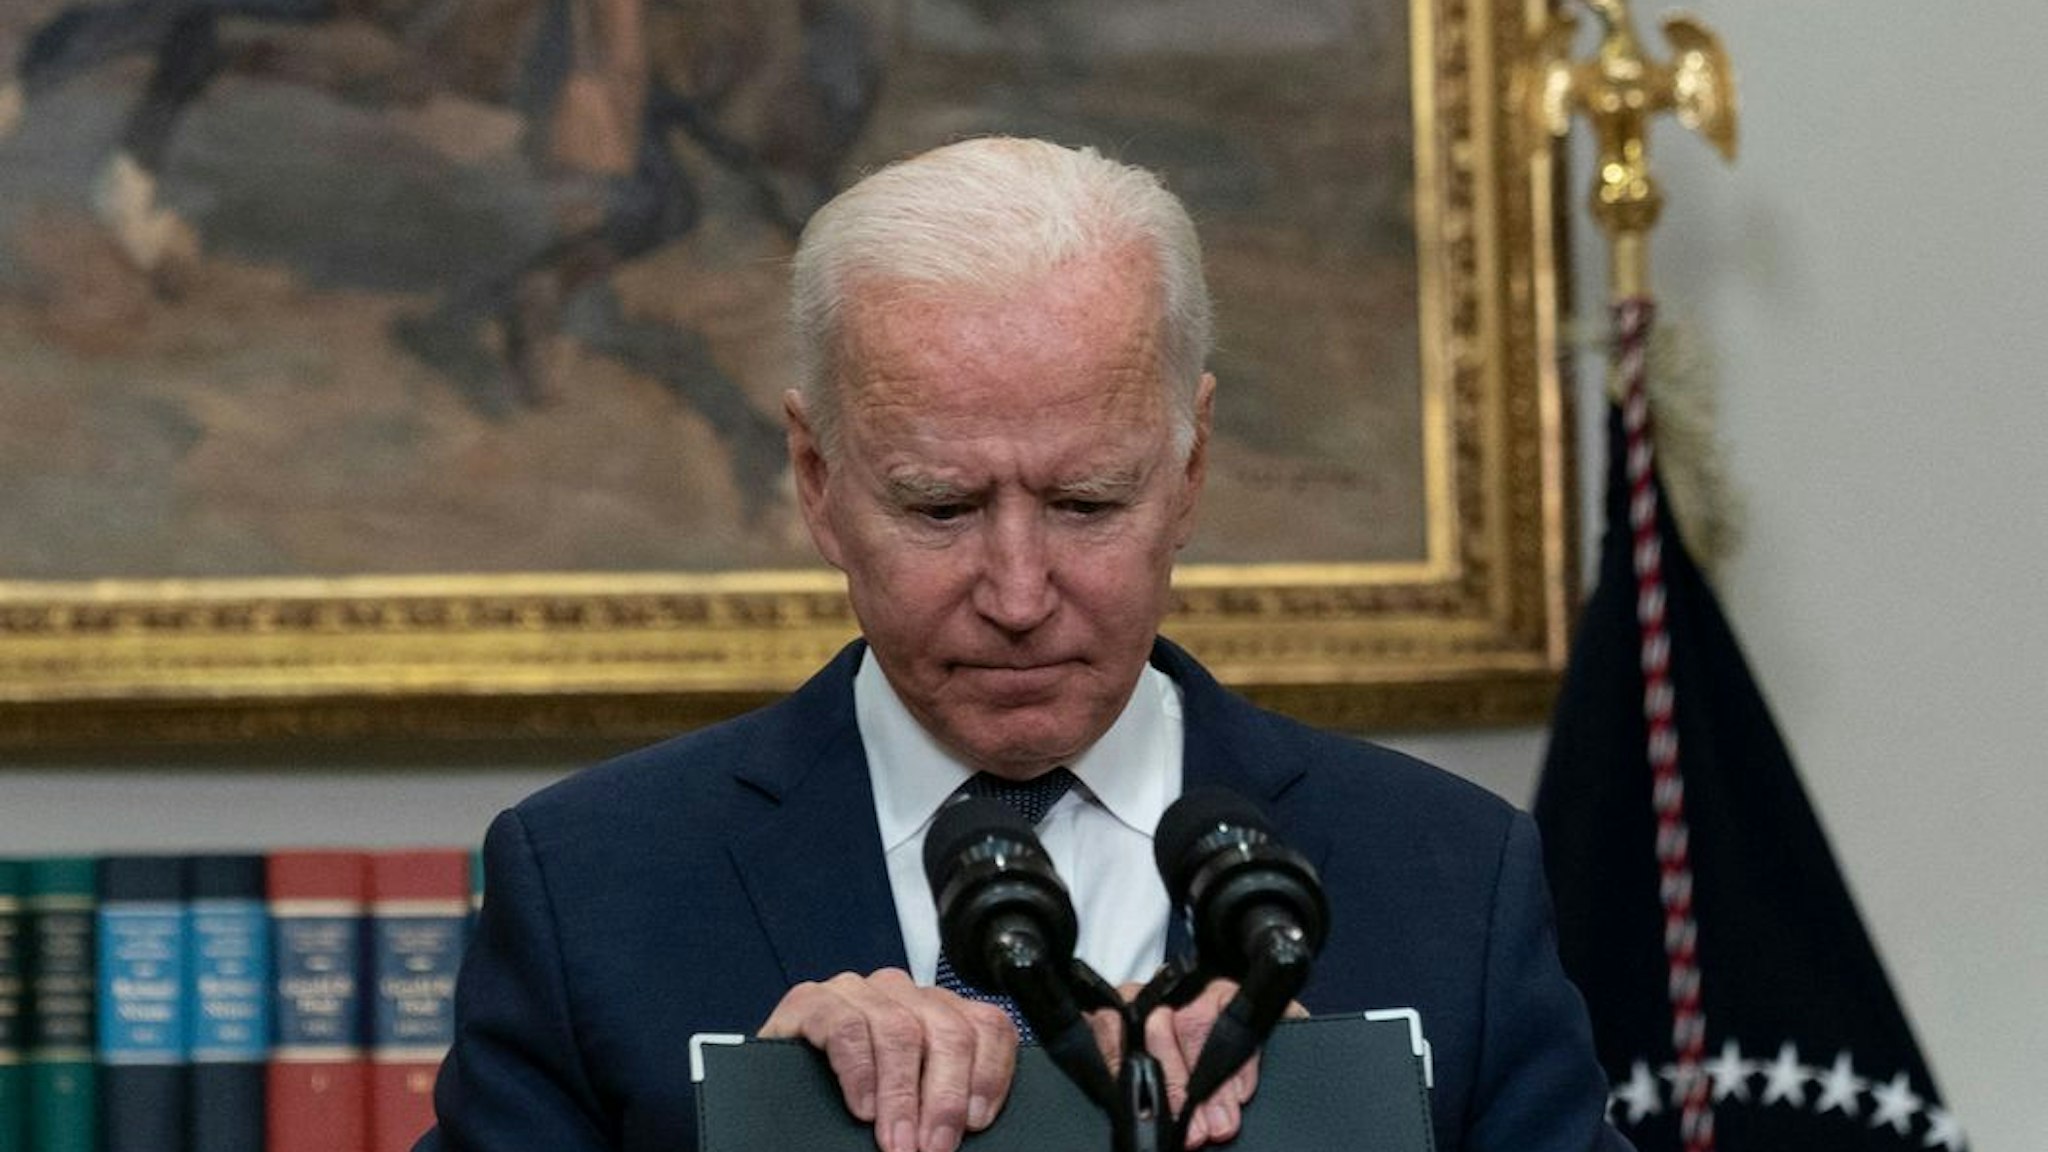 TOPSHOT - US President Joe Biden speaks during an update on the situation in Afghanistan and the effects of Tropical Storm Henri in the Roosevelt Room of the White House in Washington, DC on August 22, 2021. (Photo by ANDREW CABALLERO-REYNOLDS / AFP) (Photo by ANDREW CABALLERO-REYNOLDS/AFP via Getty Images)